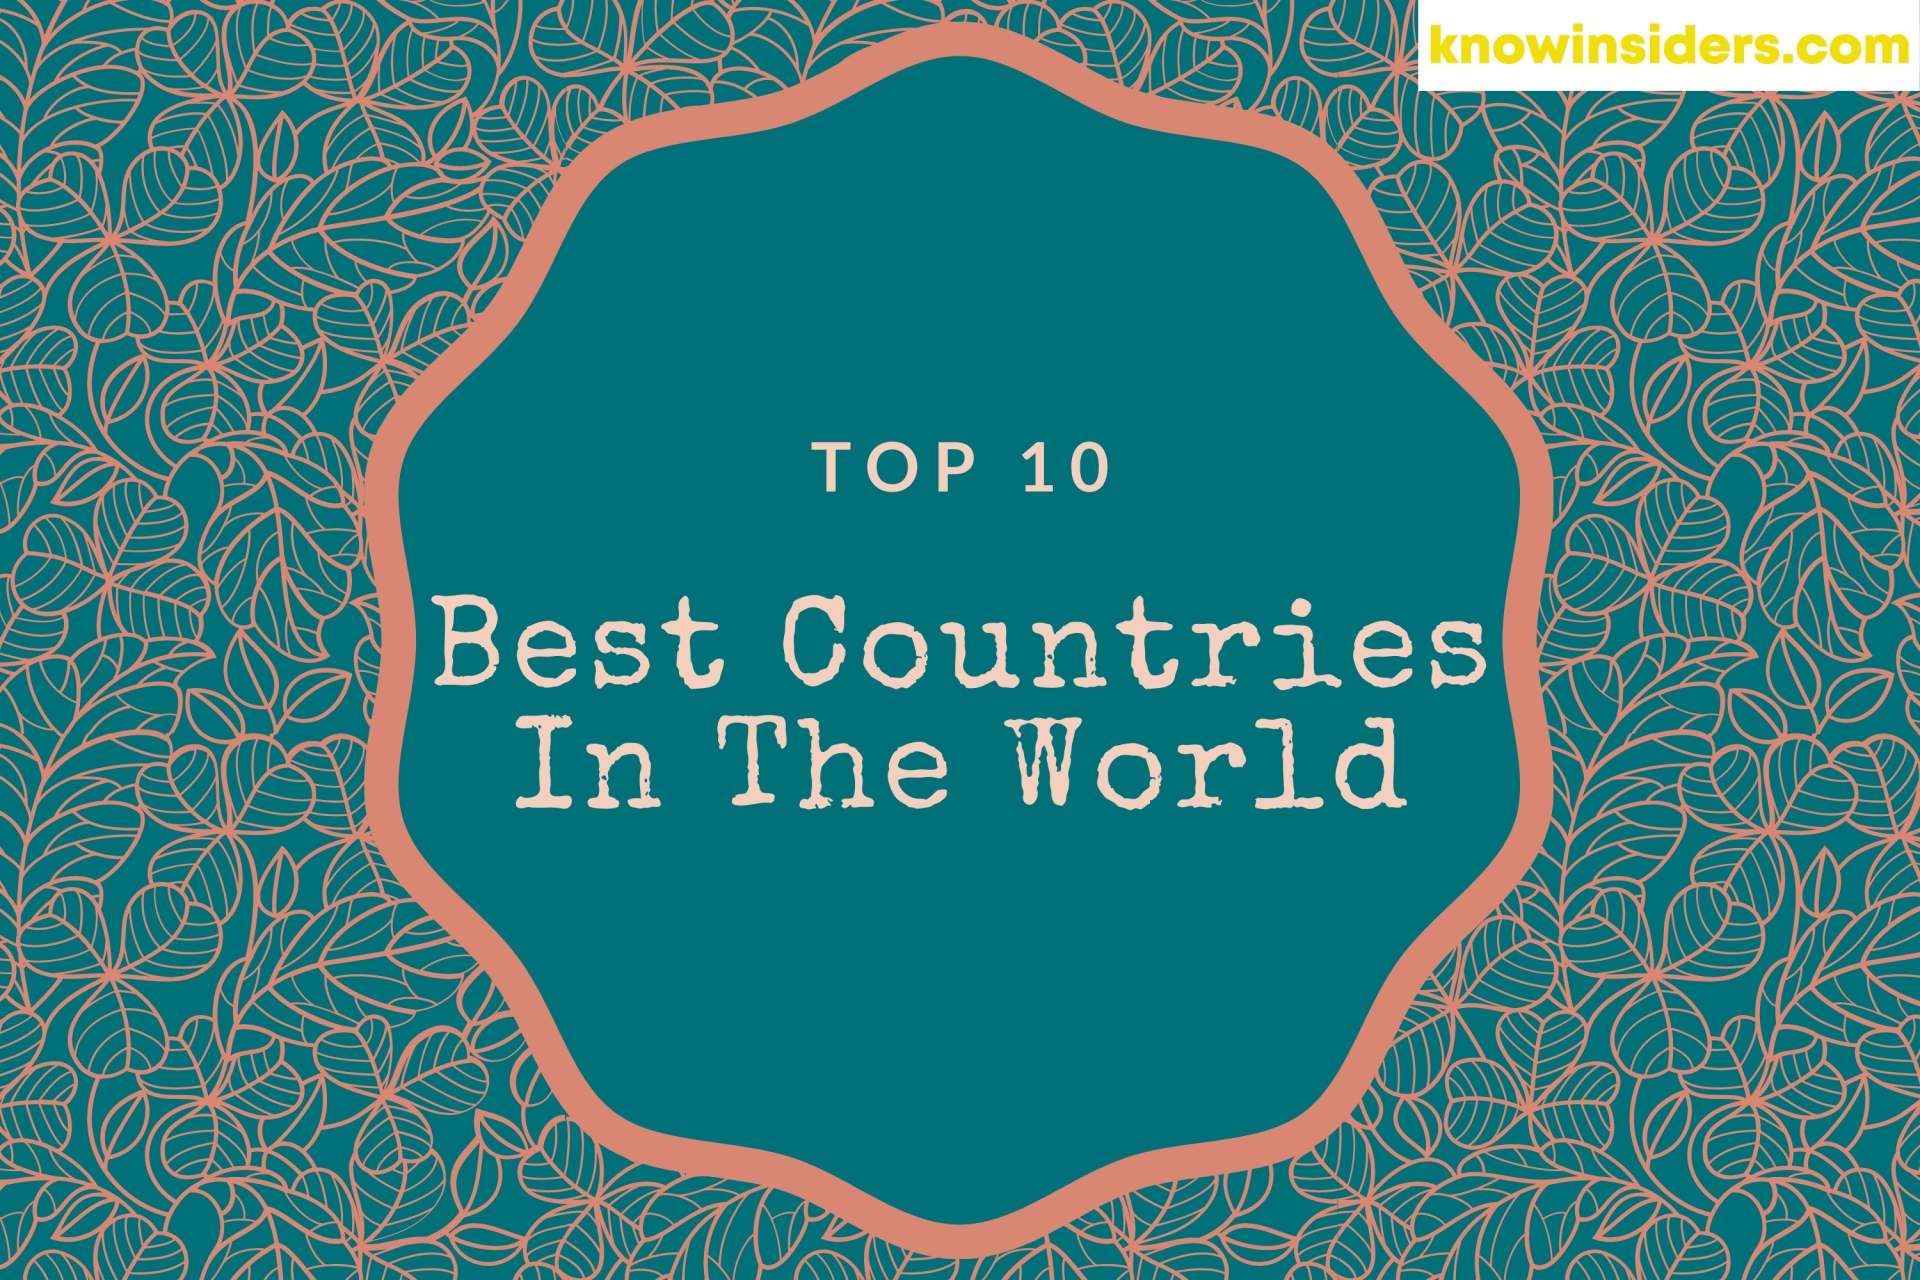 Top 10 Best Countries For Traveller In The World